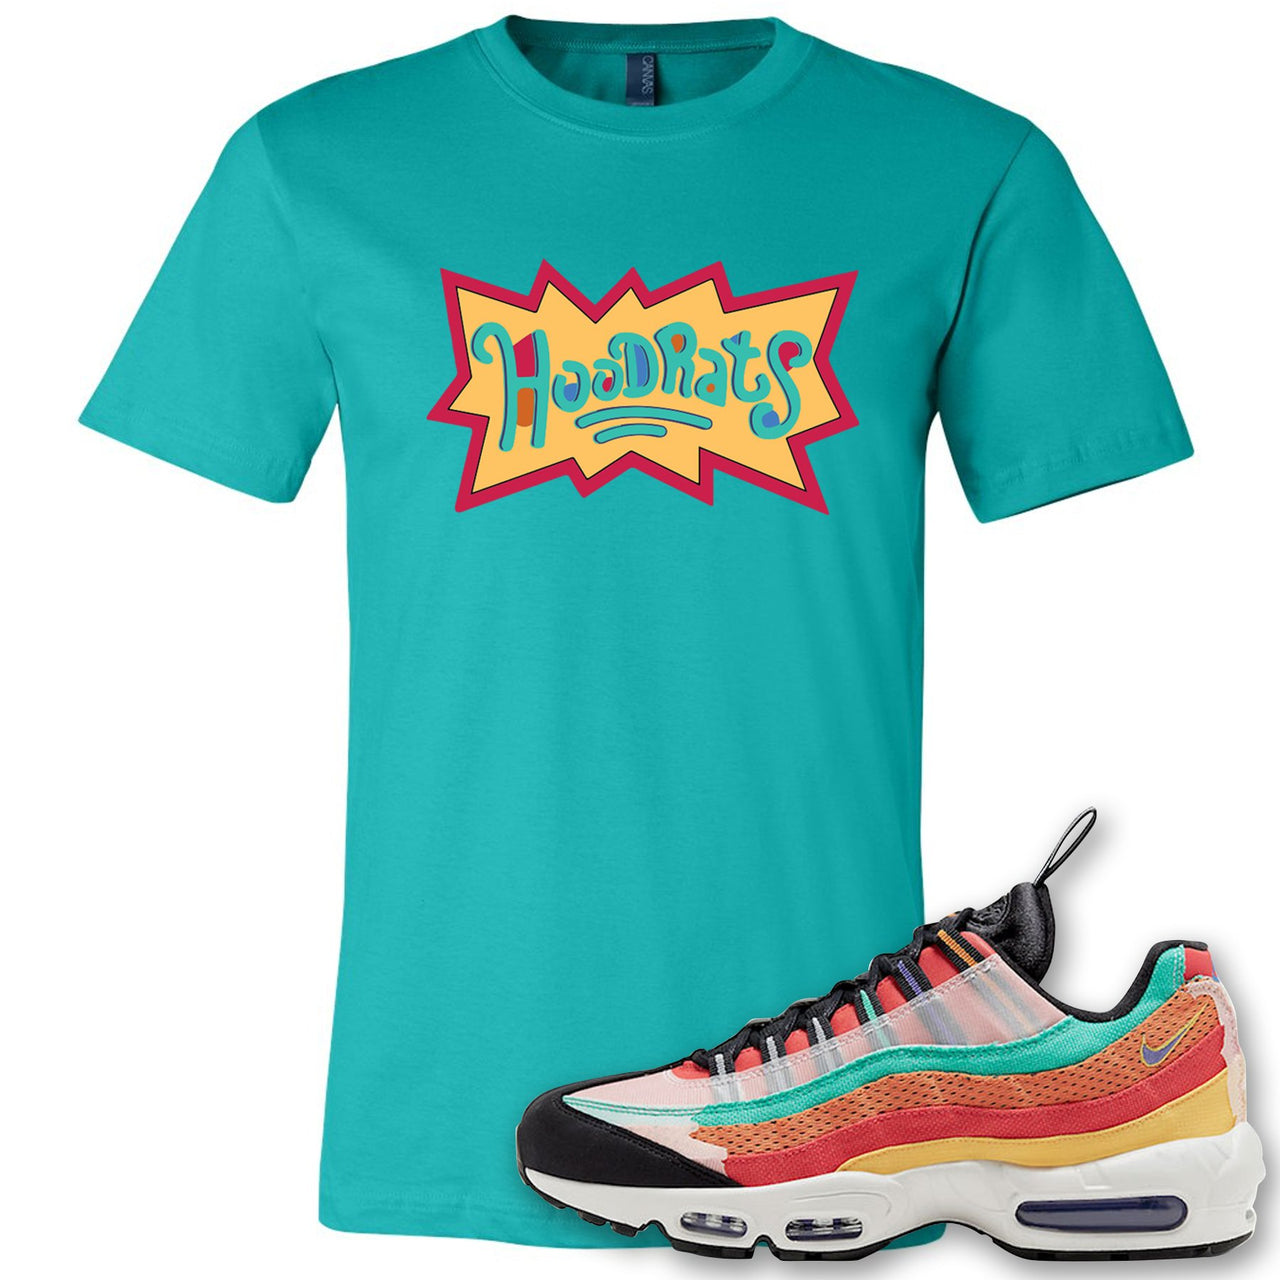 Air Max 95 Black History Month Sneaker Antique Jade Dome T Shirt | Tees to match Nike Air Max 95 Black History Month Shoes | Hood Rats